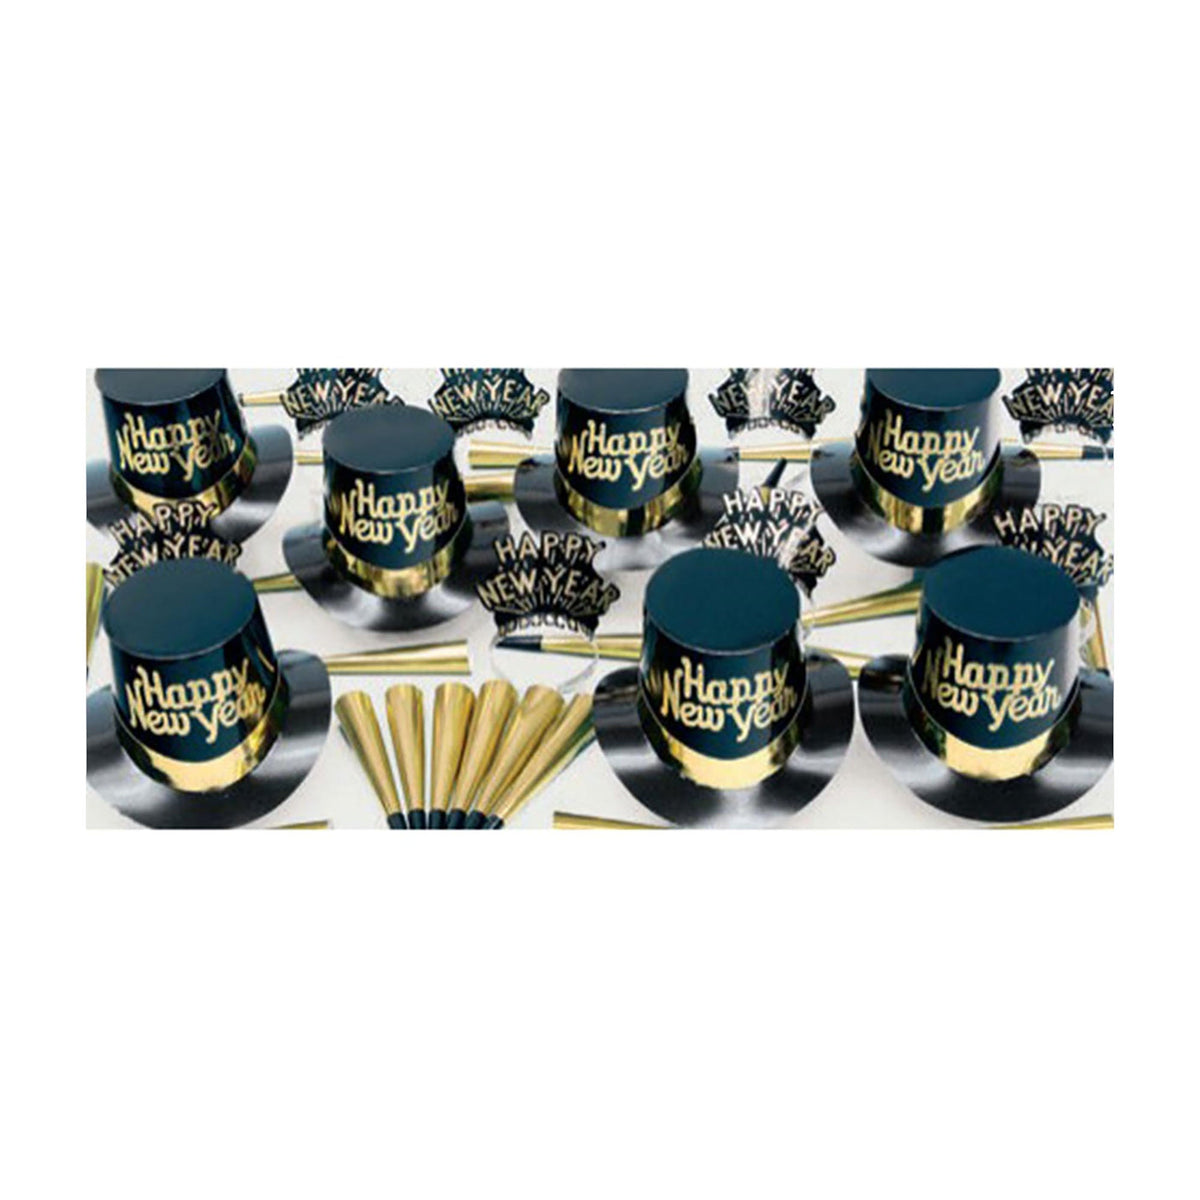 PARTY TIME MFG New Year Happy New Year Gold Dust Party Kit for 25 People, 1 Count 10372355257